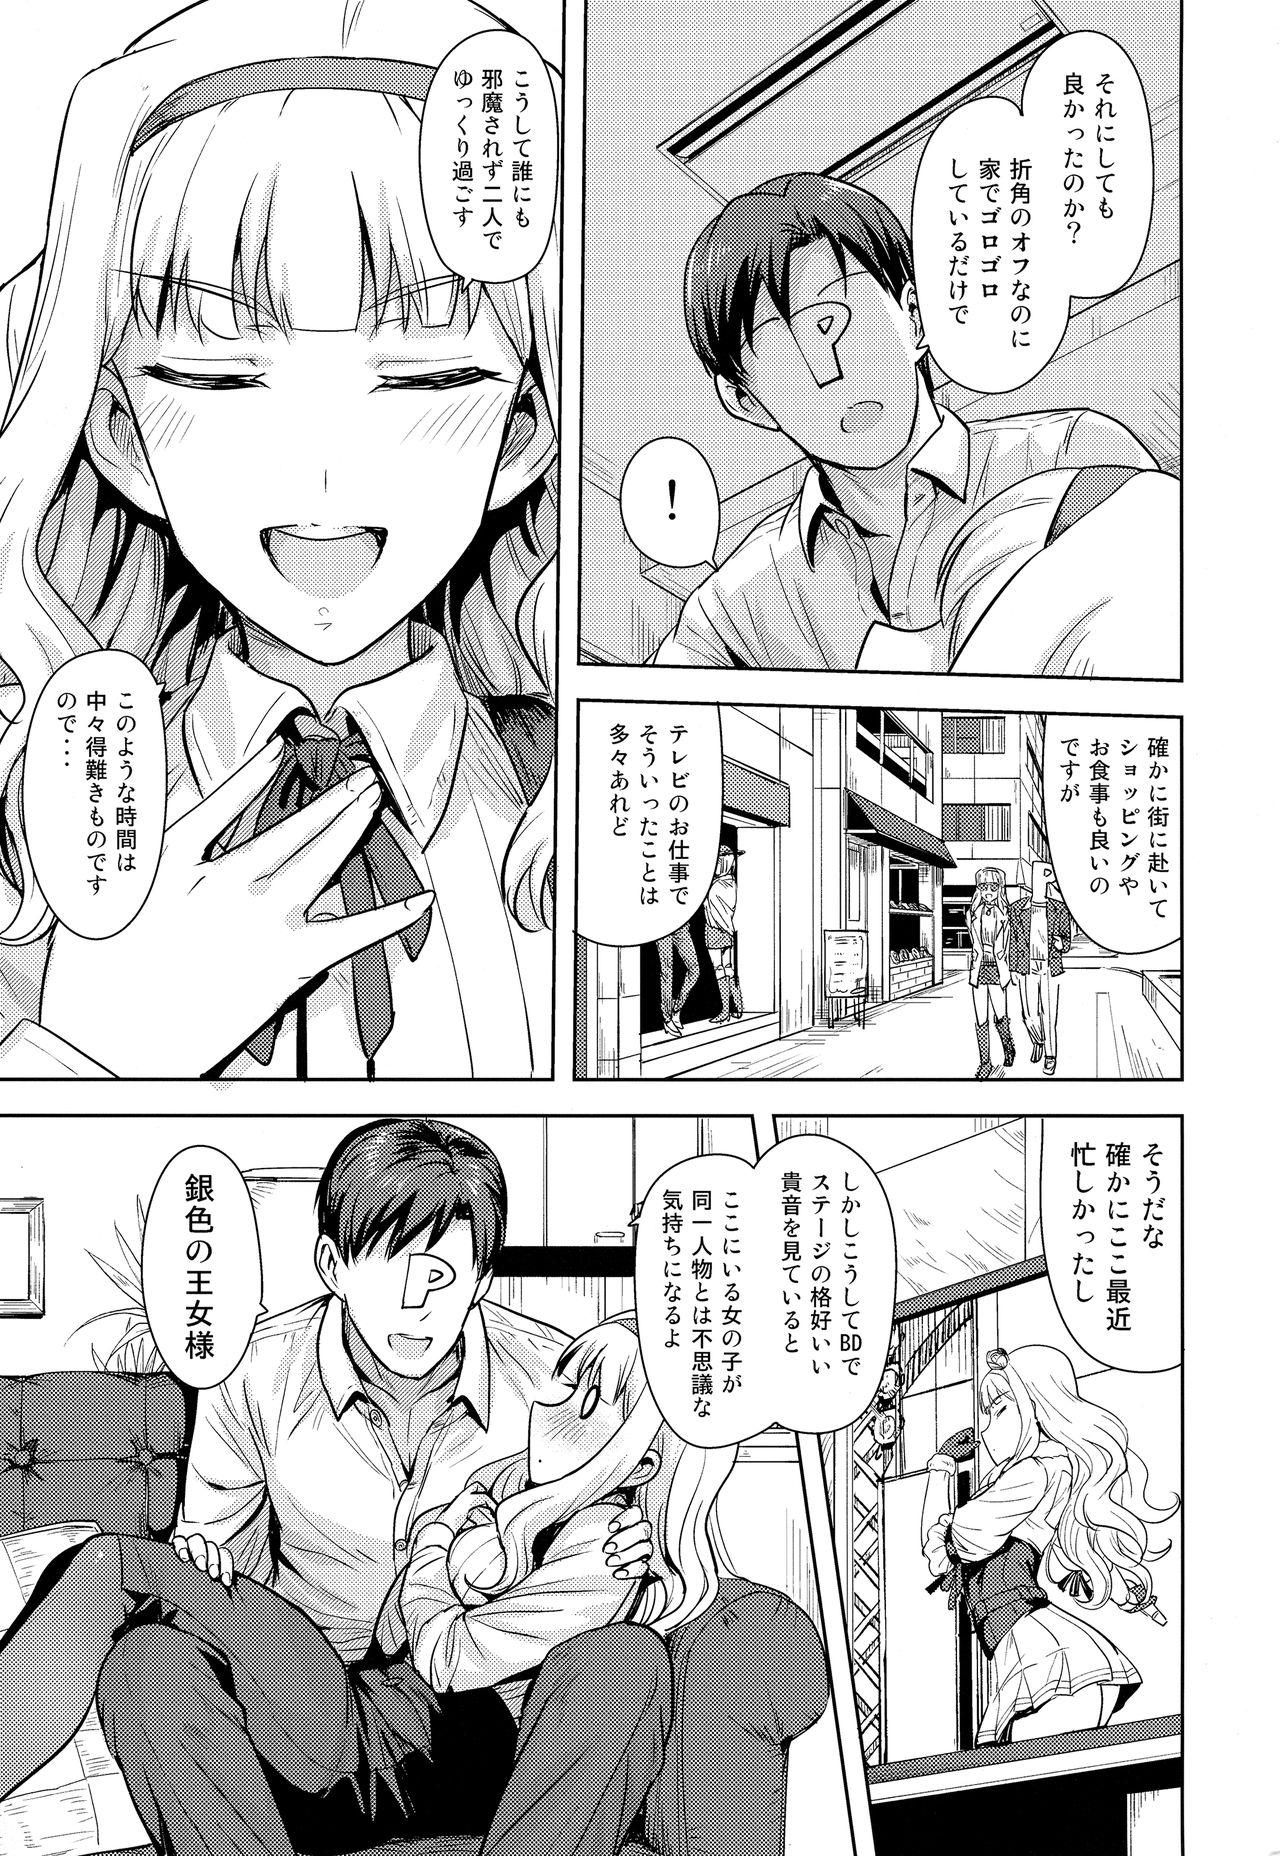 [PLANT (Tsurui)] SWEET MOON 2 (THE IDOLM@STER) page 4 full